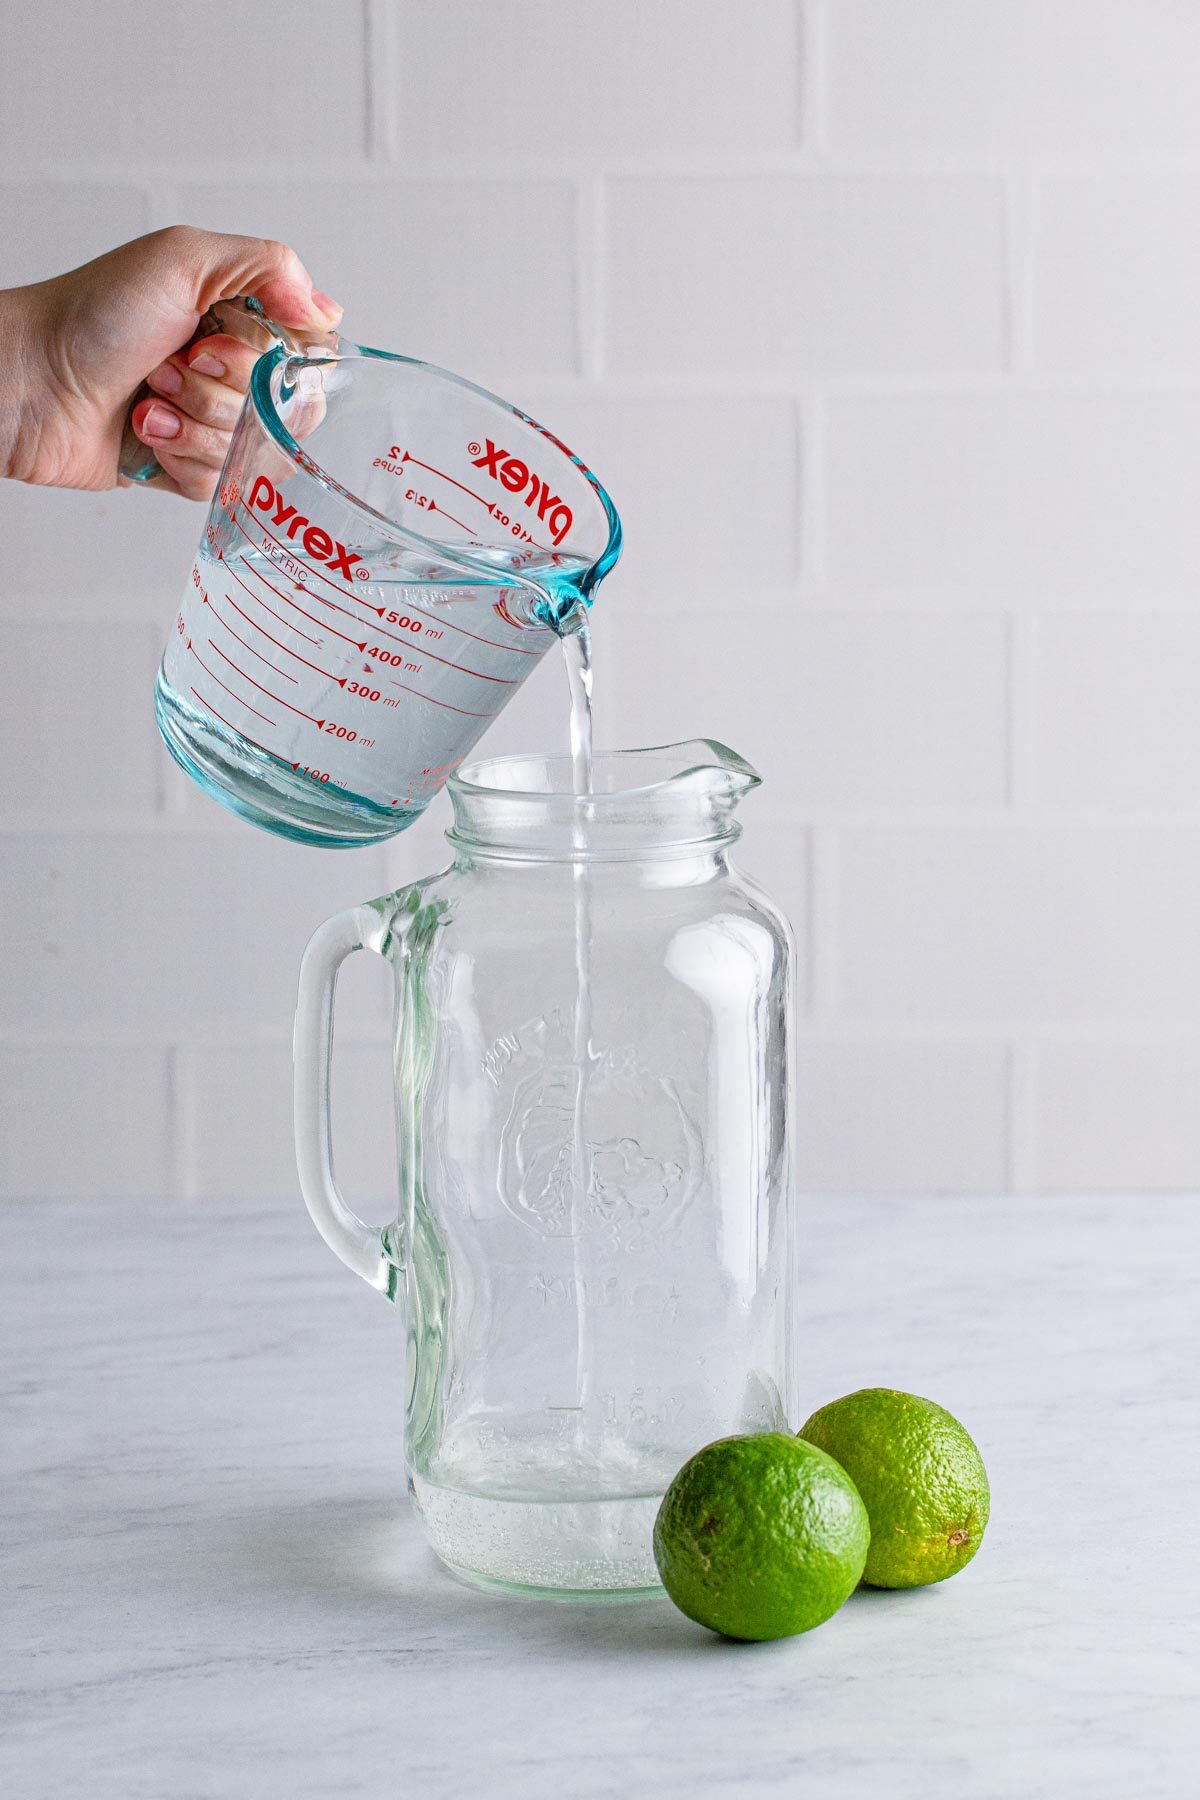 pouring Sprite into a glass pitcher